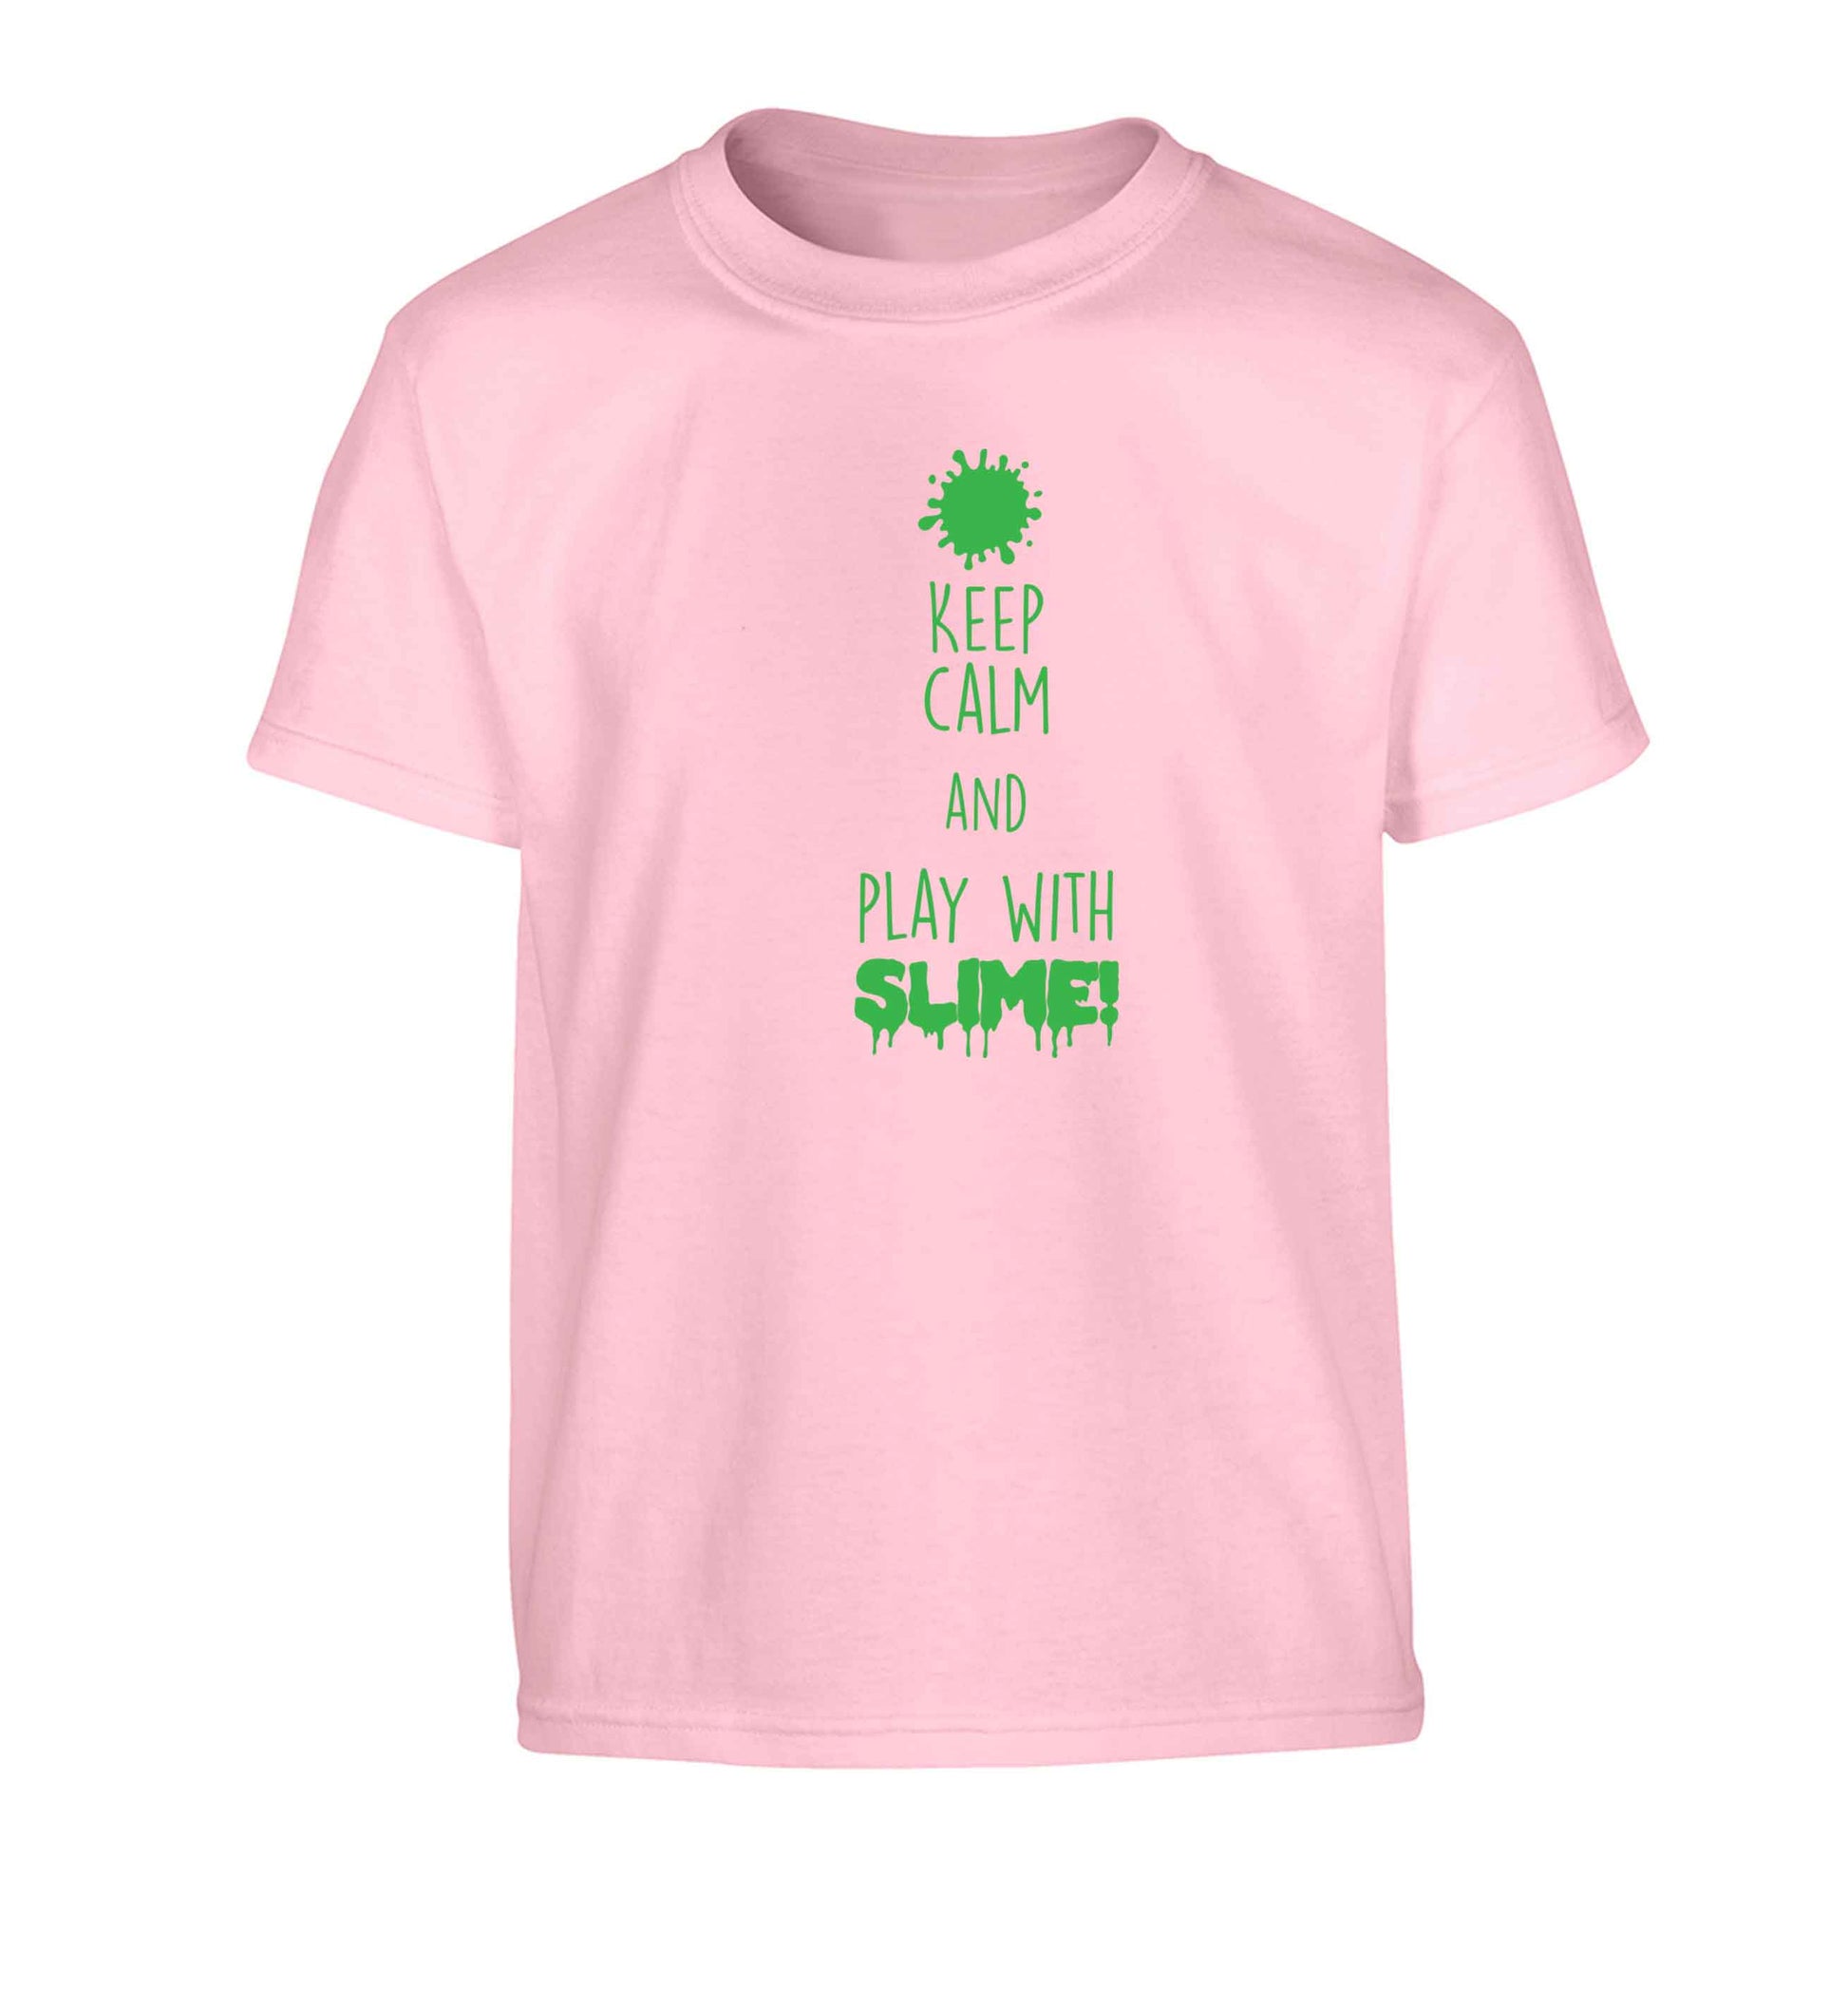 Neon green keep calm and play with slime!Children's light pink Tshirt 12-13 Years